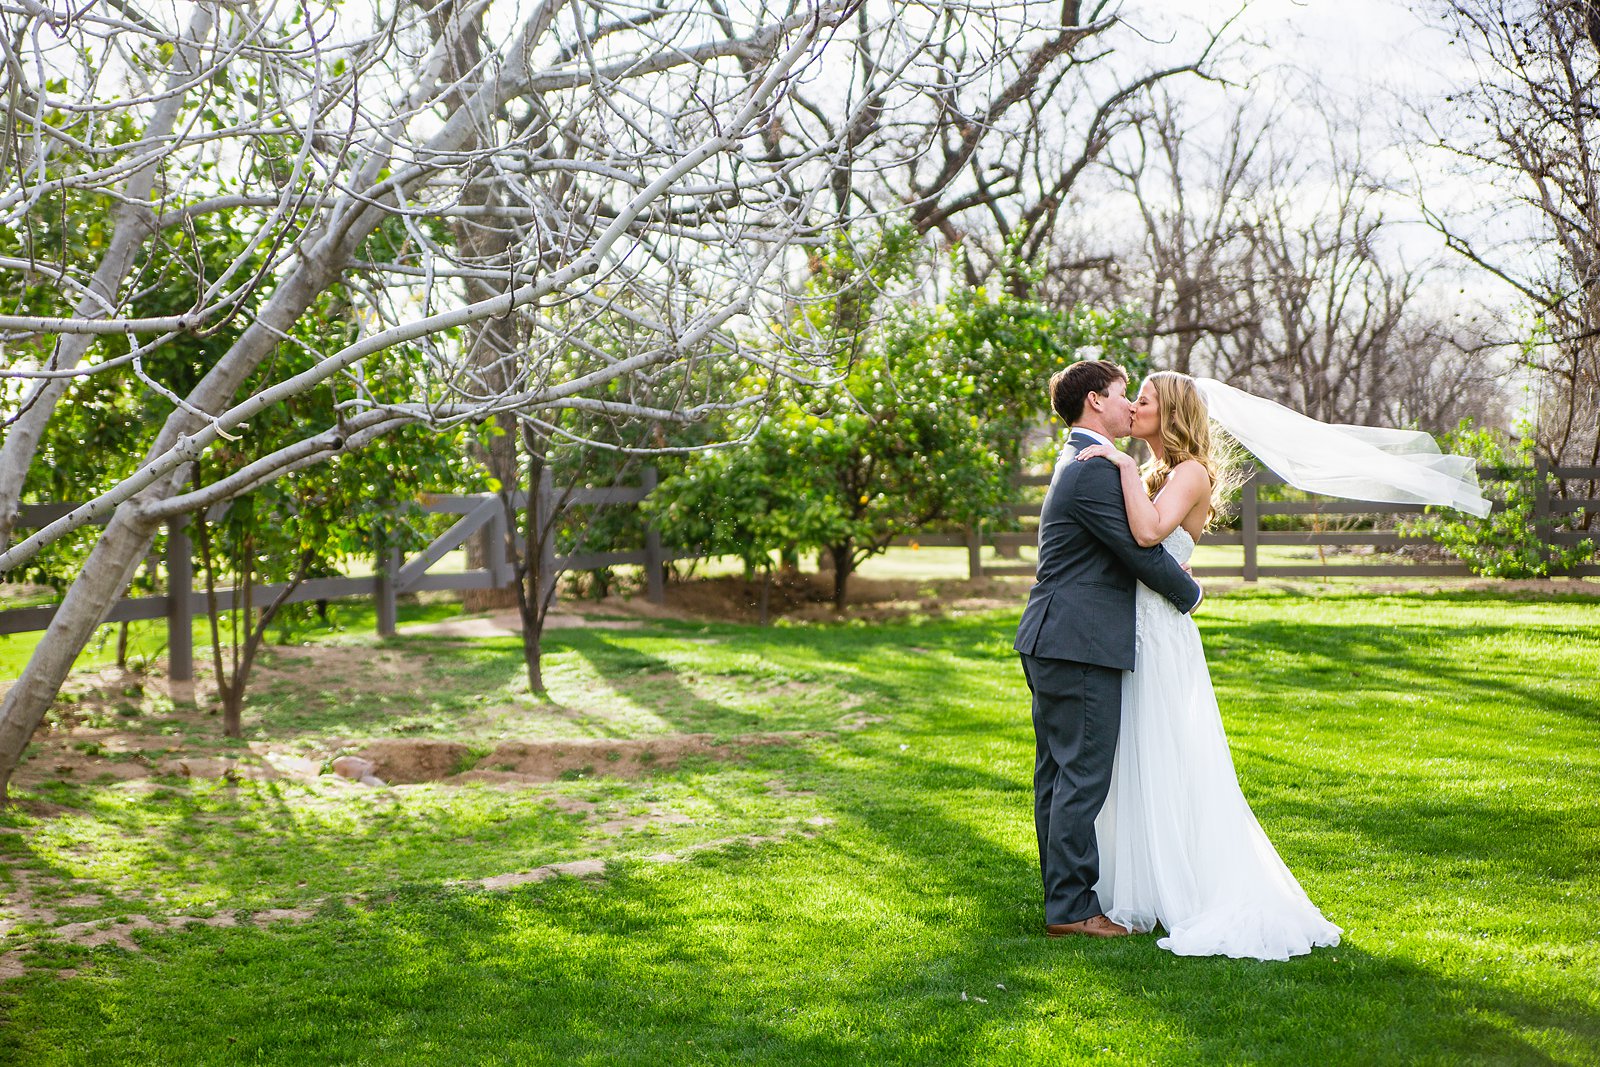 Bride and Groom share a kiss during their Venue At The Grove wedding by Arizona wedding photographer PMA Photography.